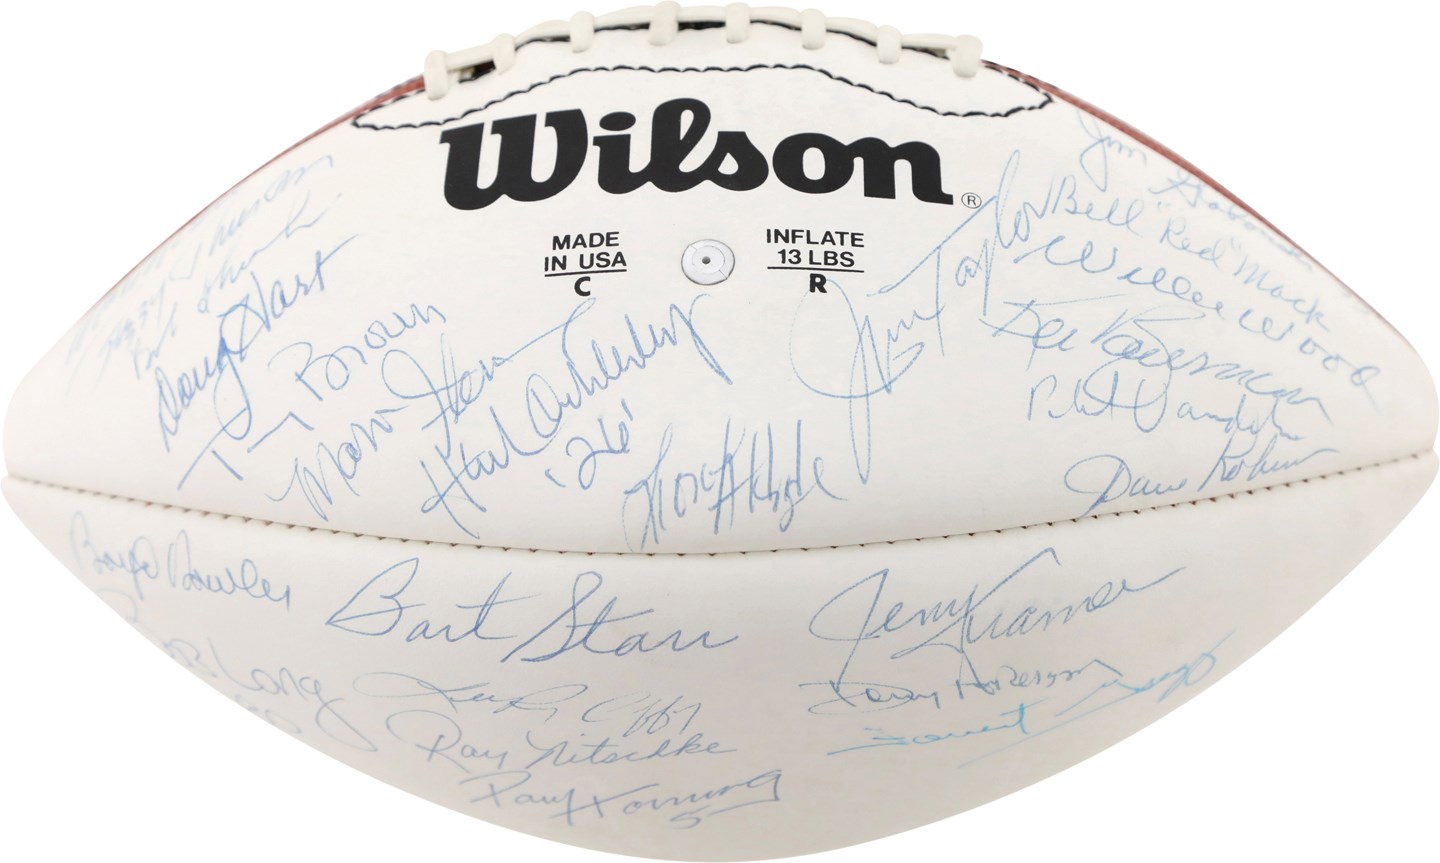 Green Bay Packers Greats Signed Football w/Starr, Hornung, and Nitscke